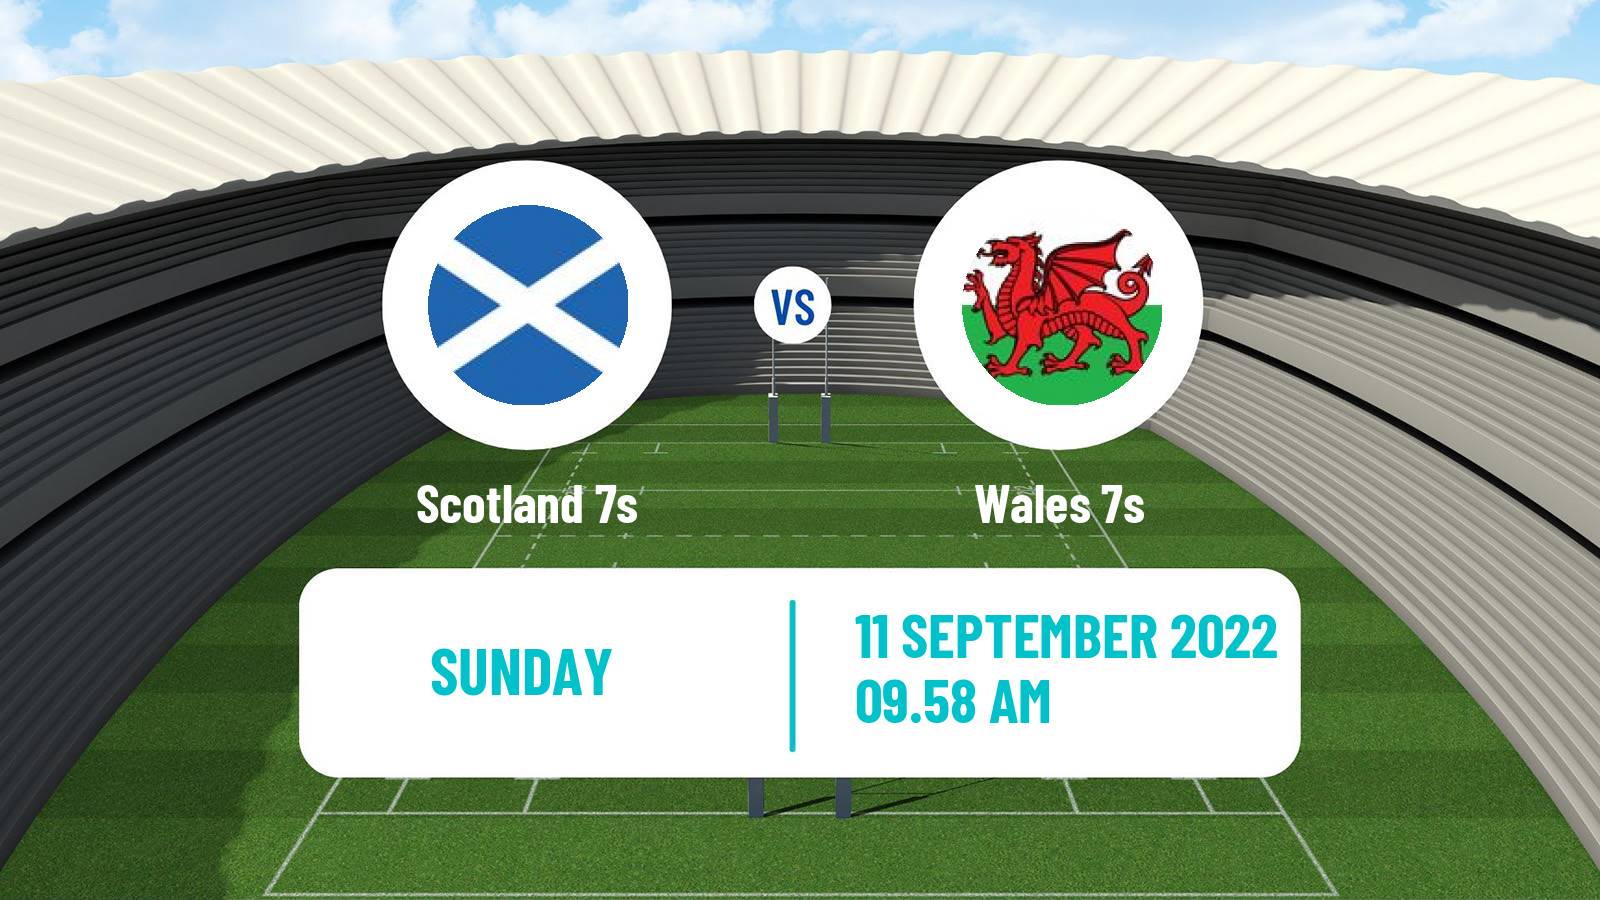 Rugby union Sevens World Cup Scotland 7s - Wales 7s